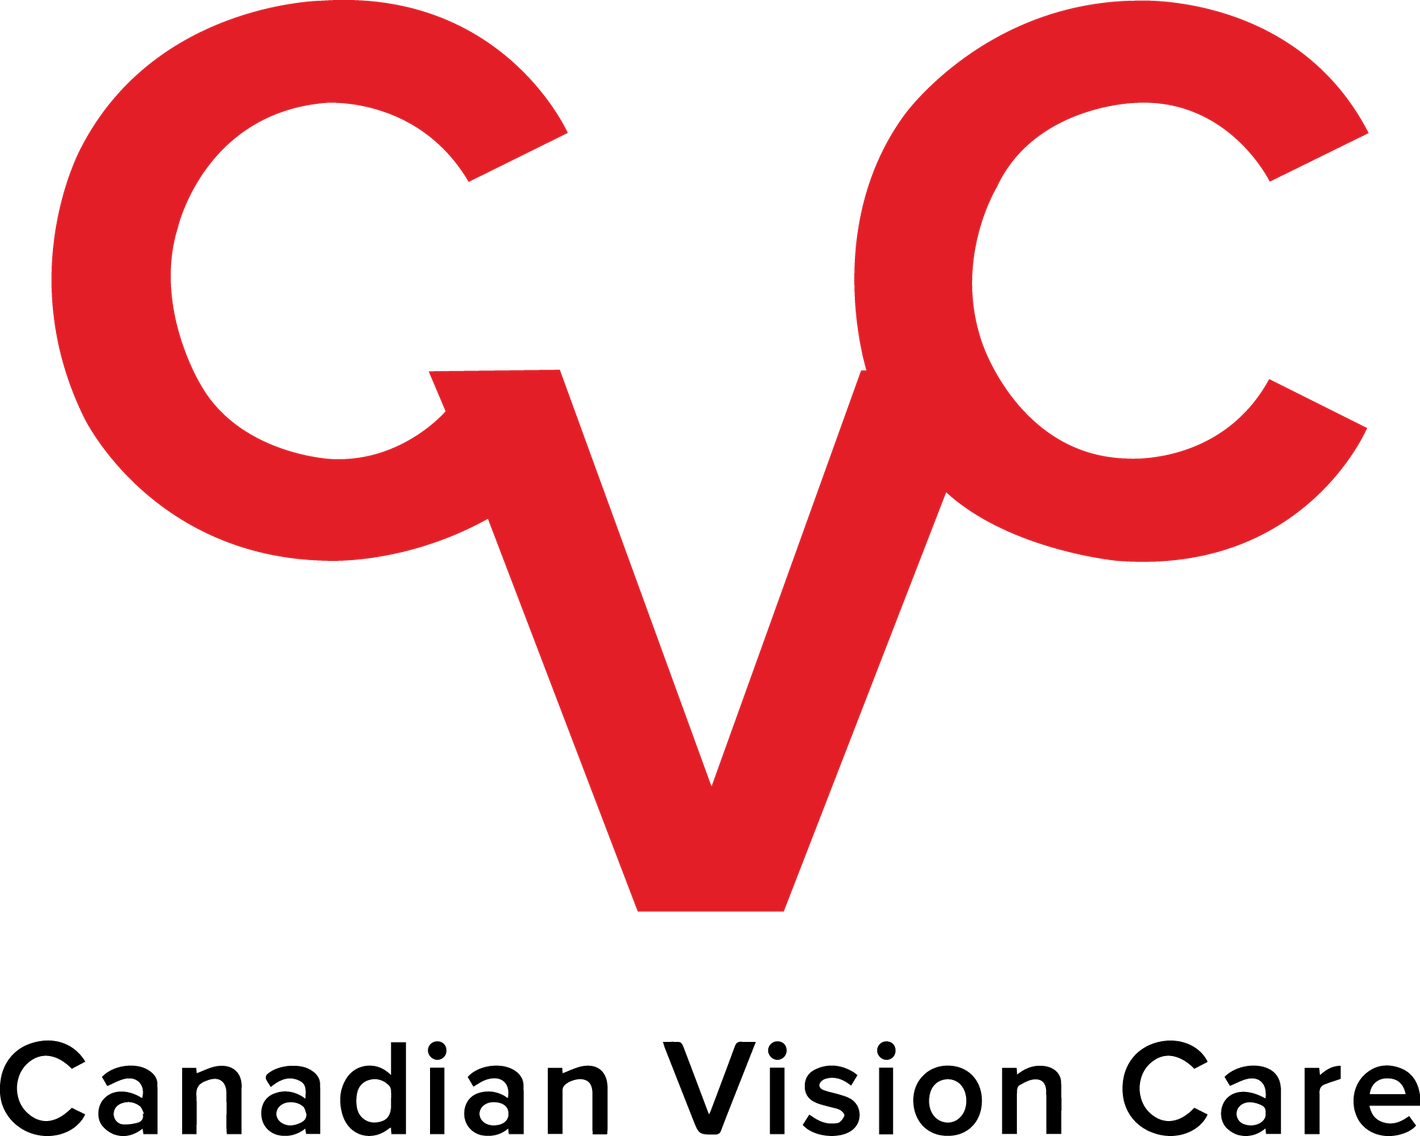 Red letters C V C with Canadian Vision Care written underneath.